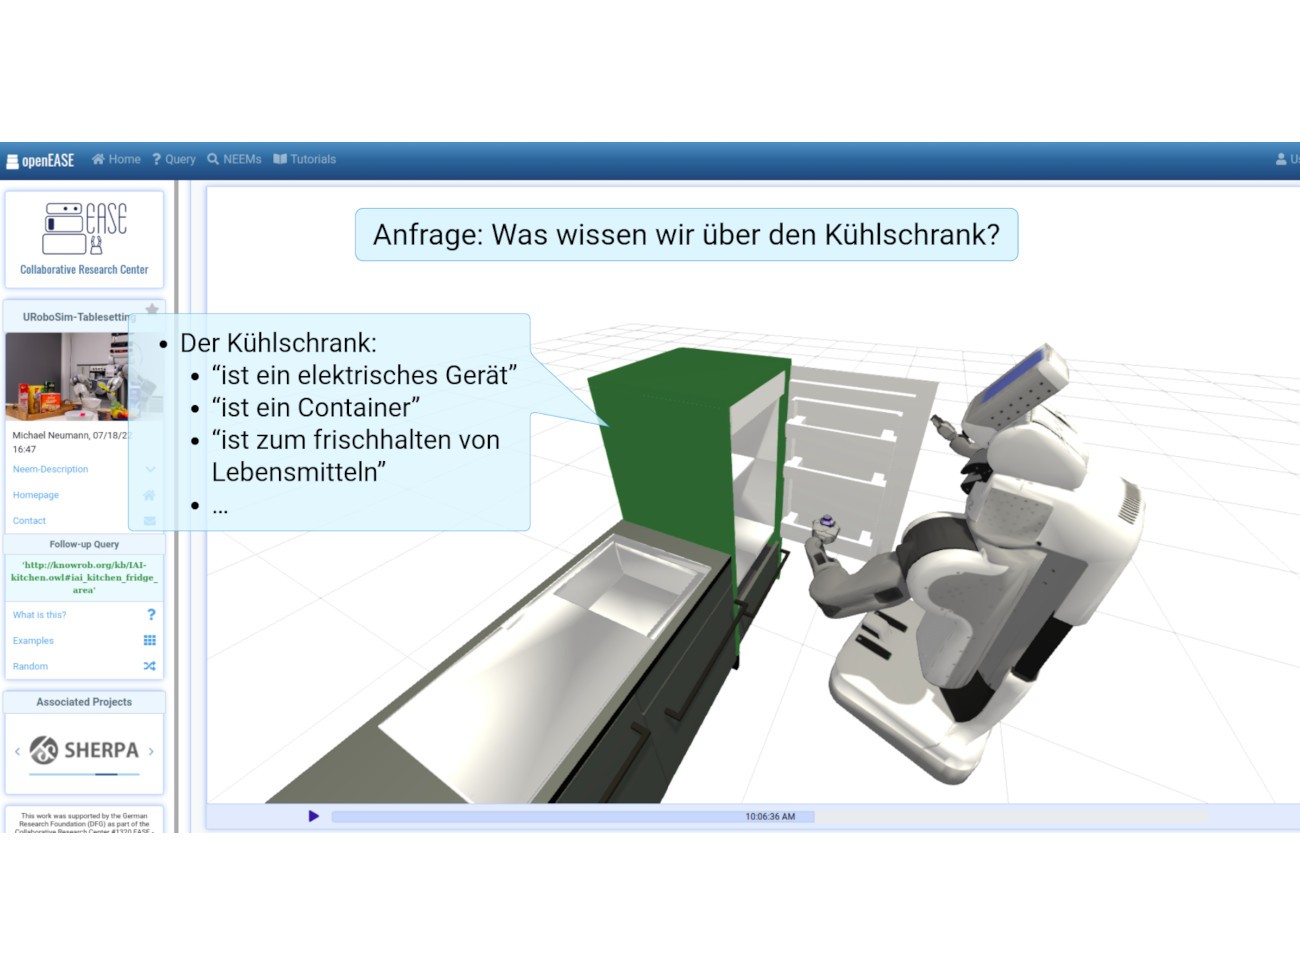 A screenshot of the openEASE knowledge platform asking what the robot knows about the fridge.